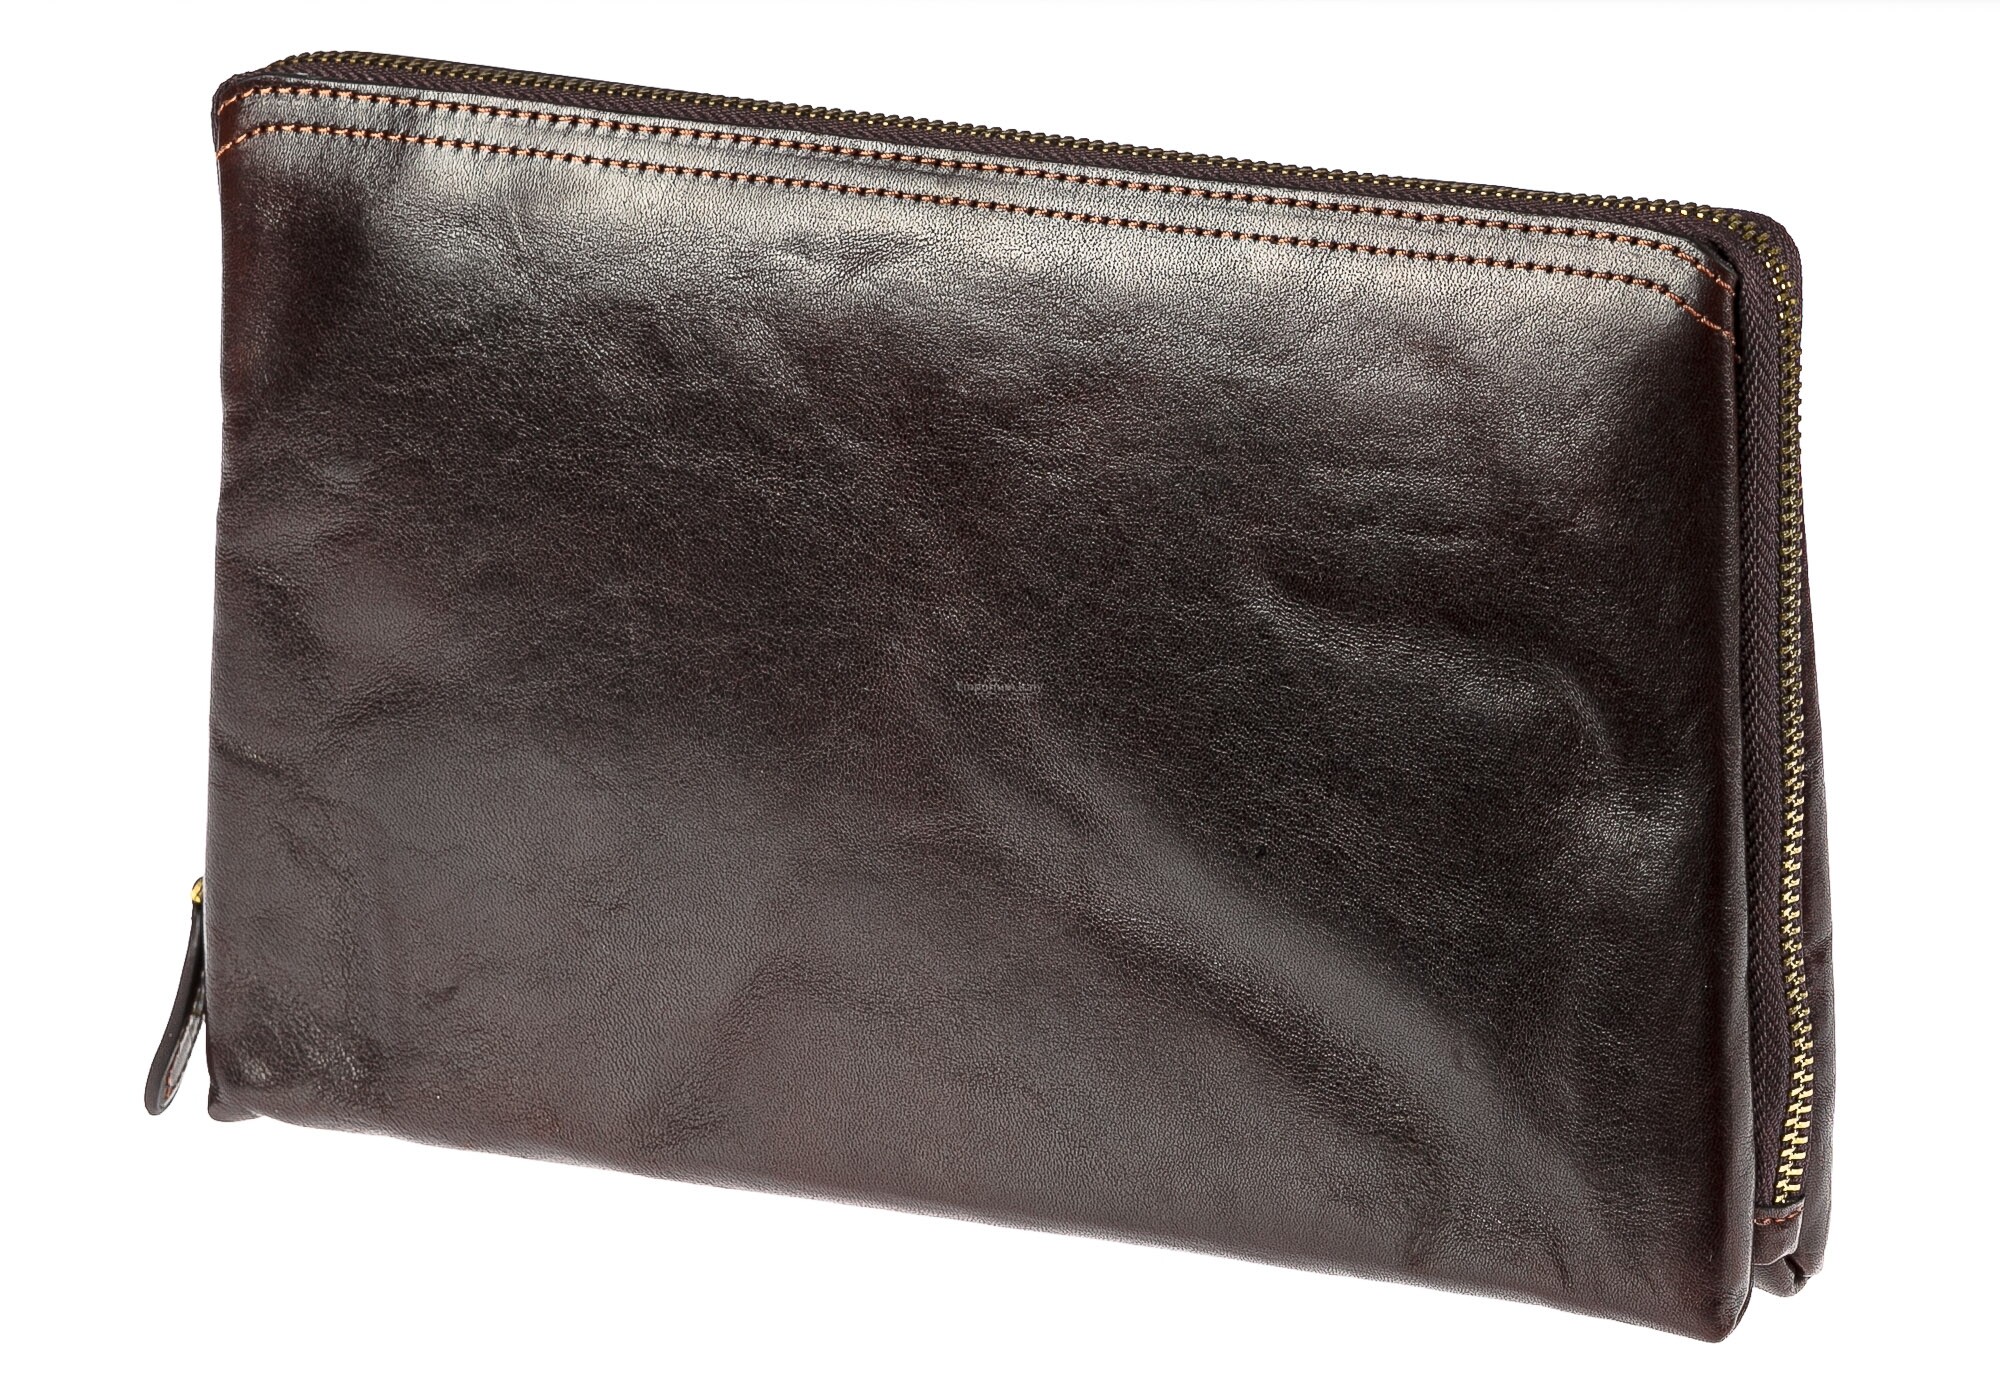 Genuine leather clutch bag for man NATHAN MAXI, DARK BROWN colour,  CHIAROSCURO, MADE IN ITALY, MENS LEATHER CLUCH BAGS